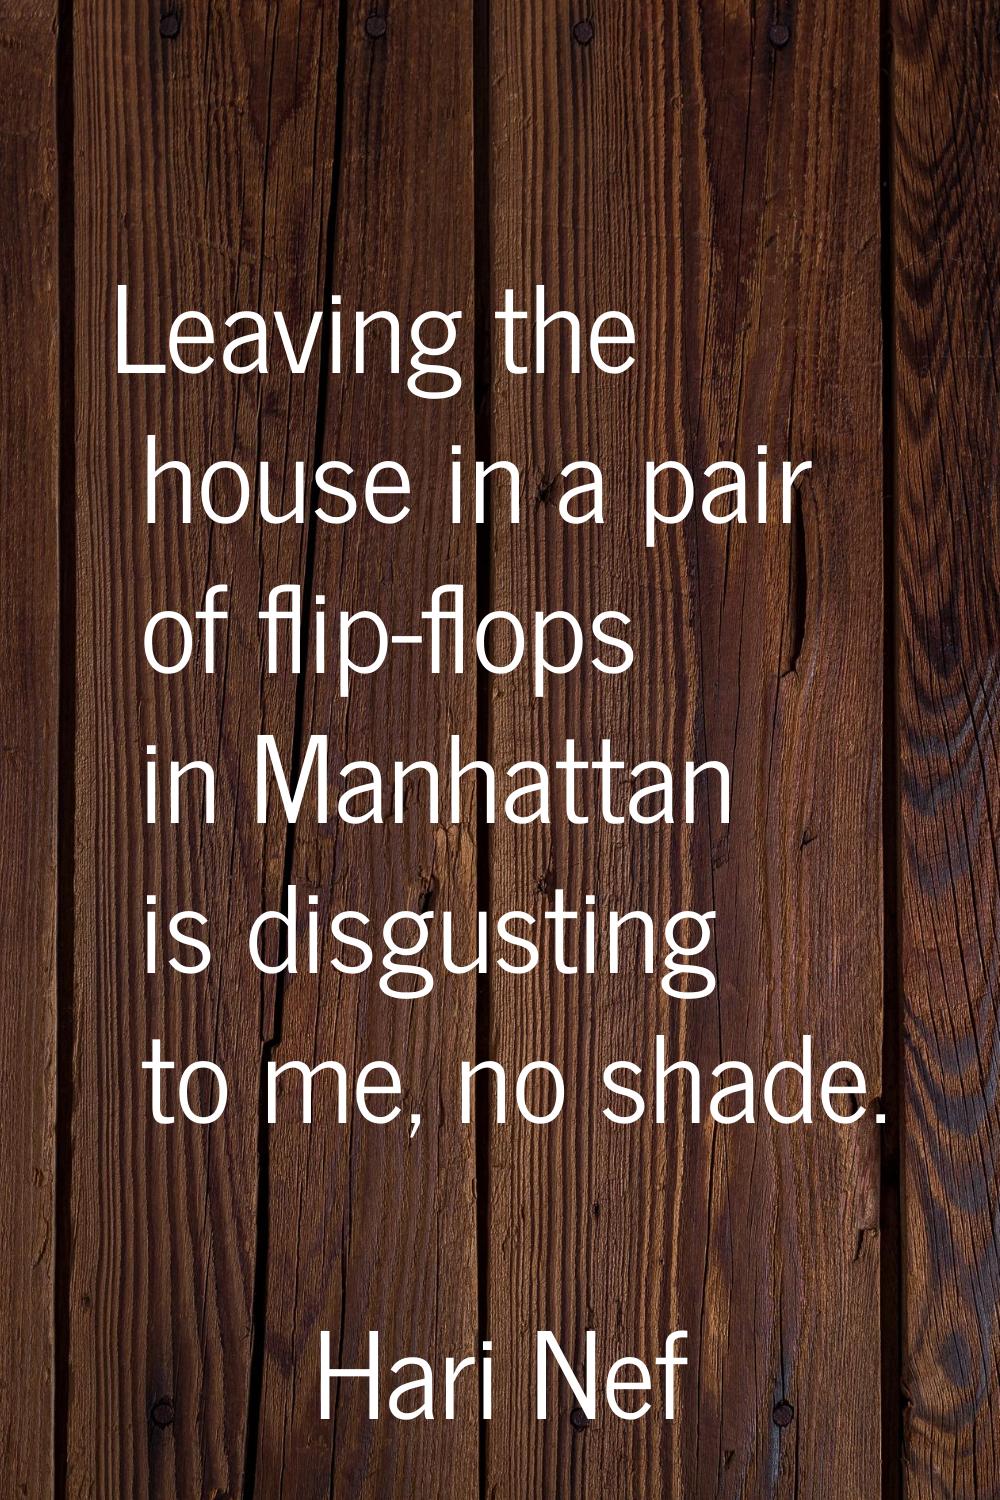 Leaving the house in a pair of flip-flops in Manhattan is disgusting to me, no shade.